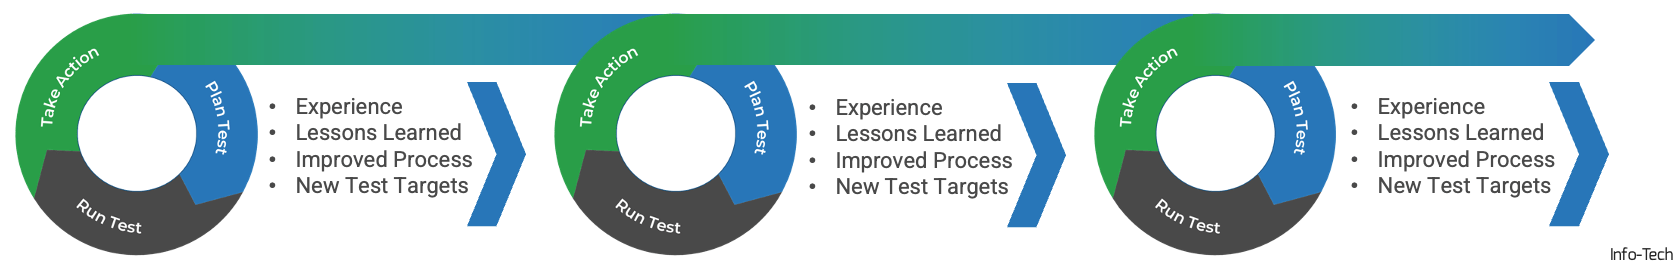 Experience, lessons learned, improved process, new test targets, repeat.